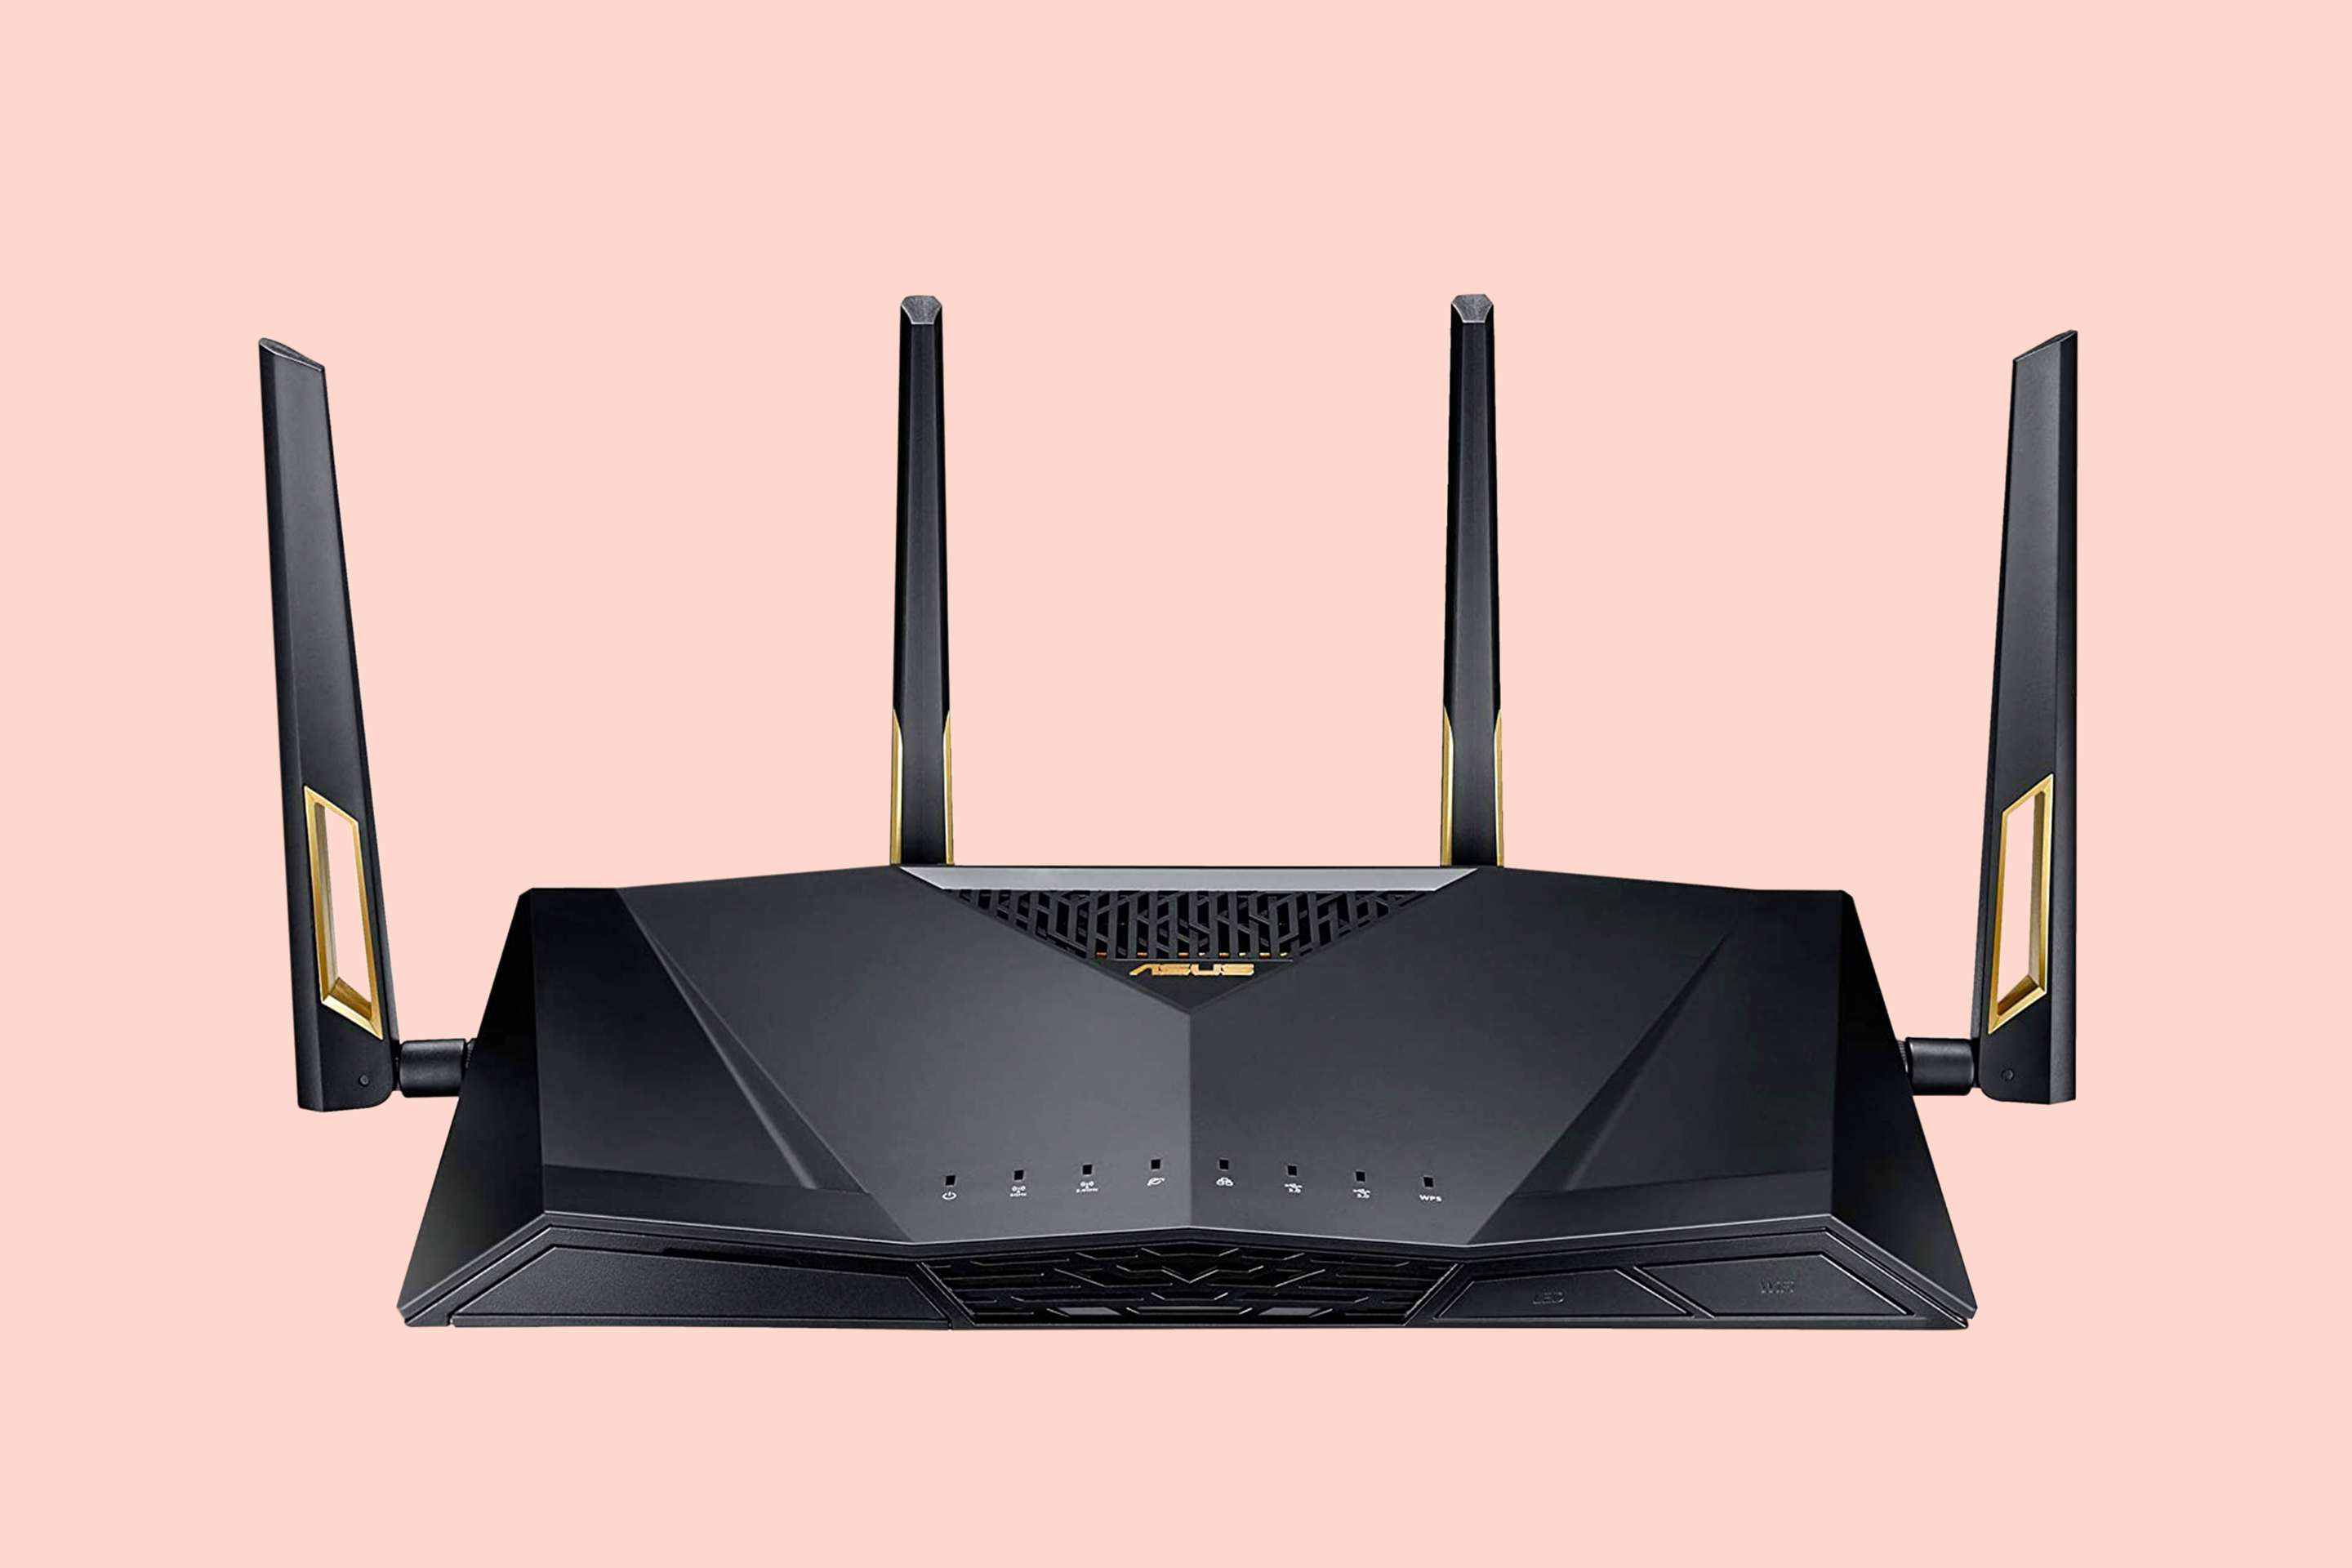 The Best Routers for Fiber Optic Internet in 2021 